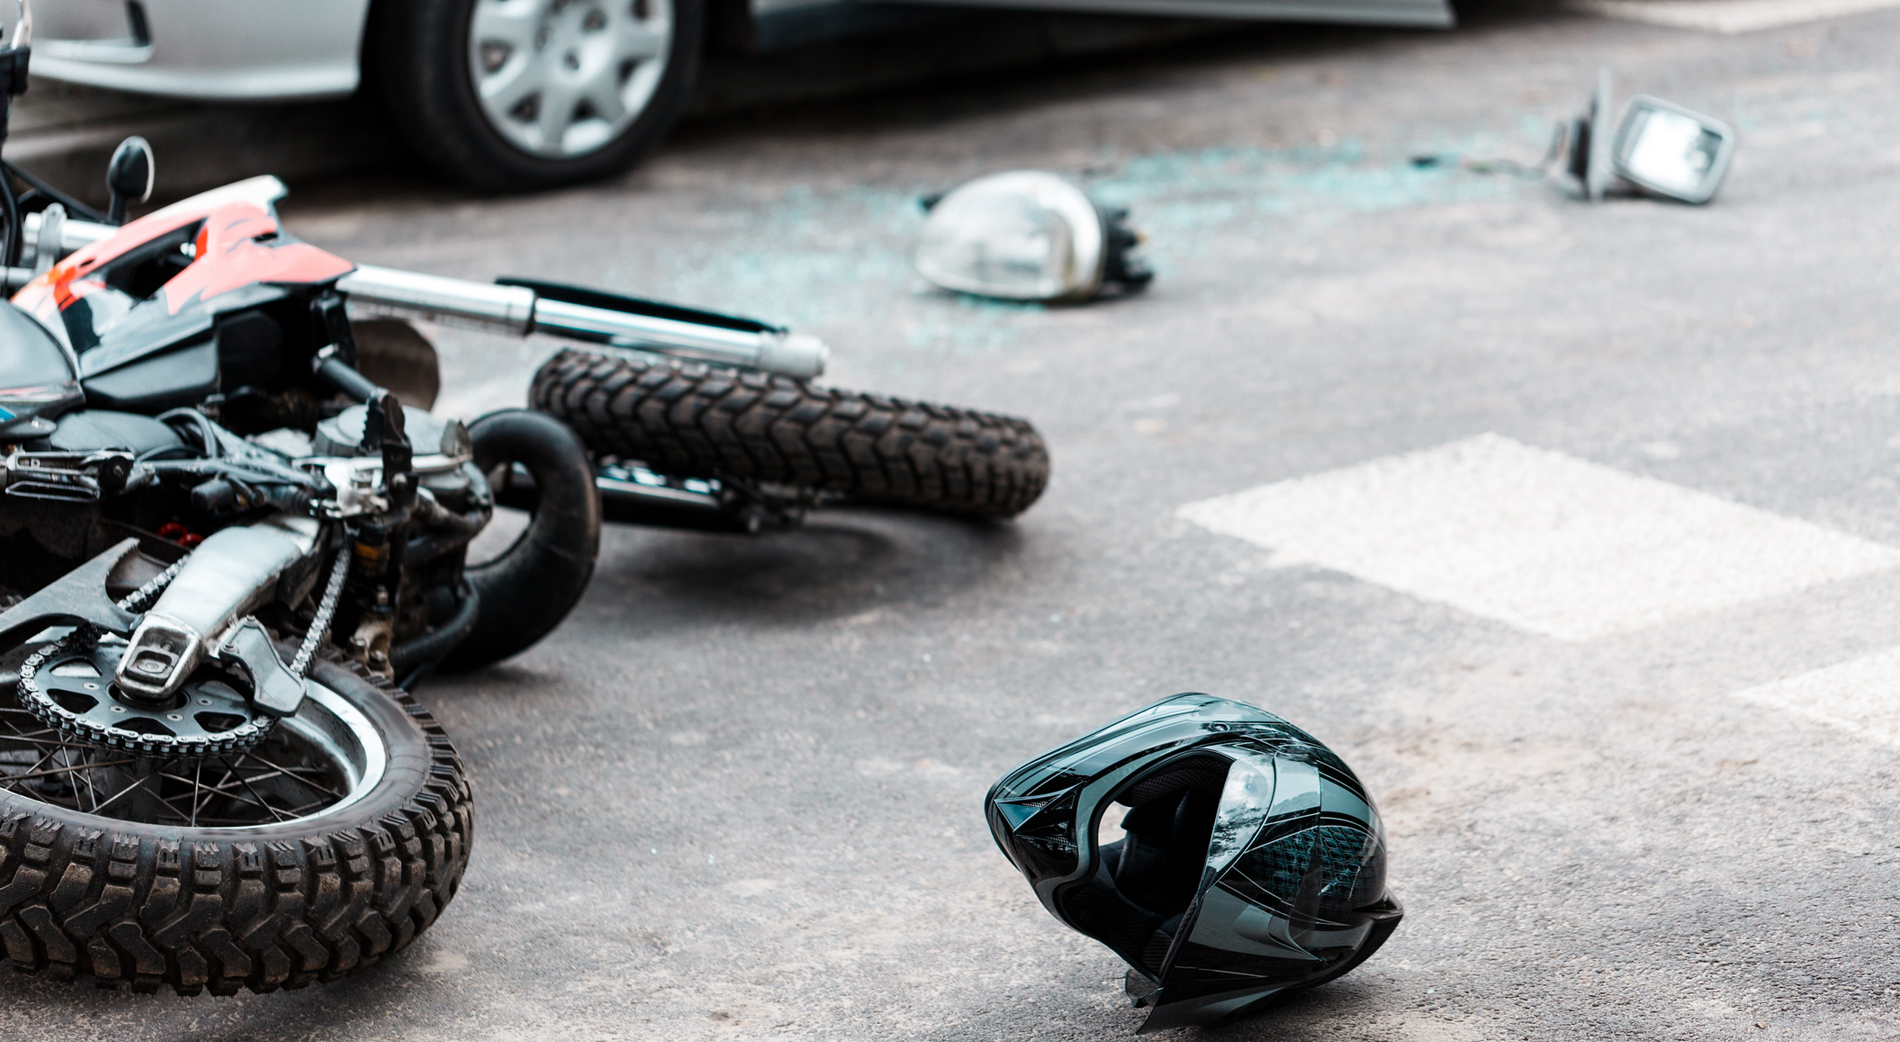 5 Steps to Take If You’ve Been Involved in a Scooter Accident